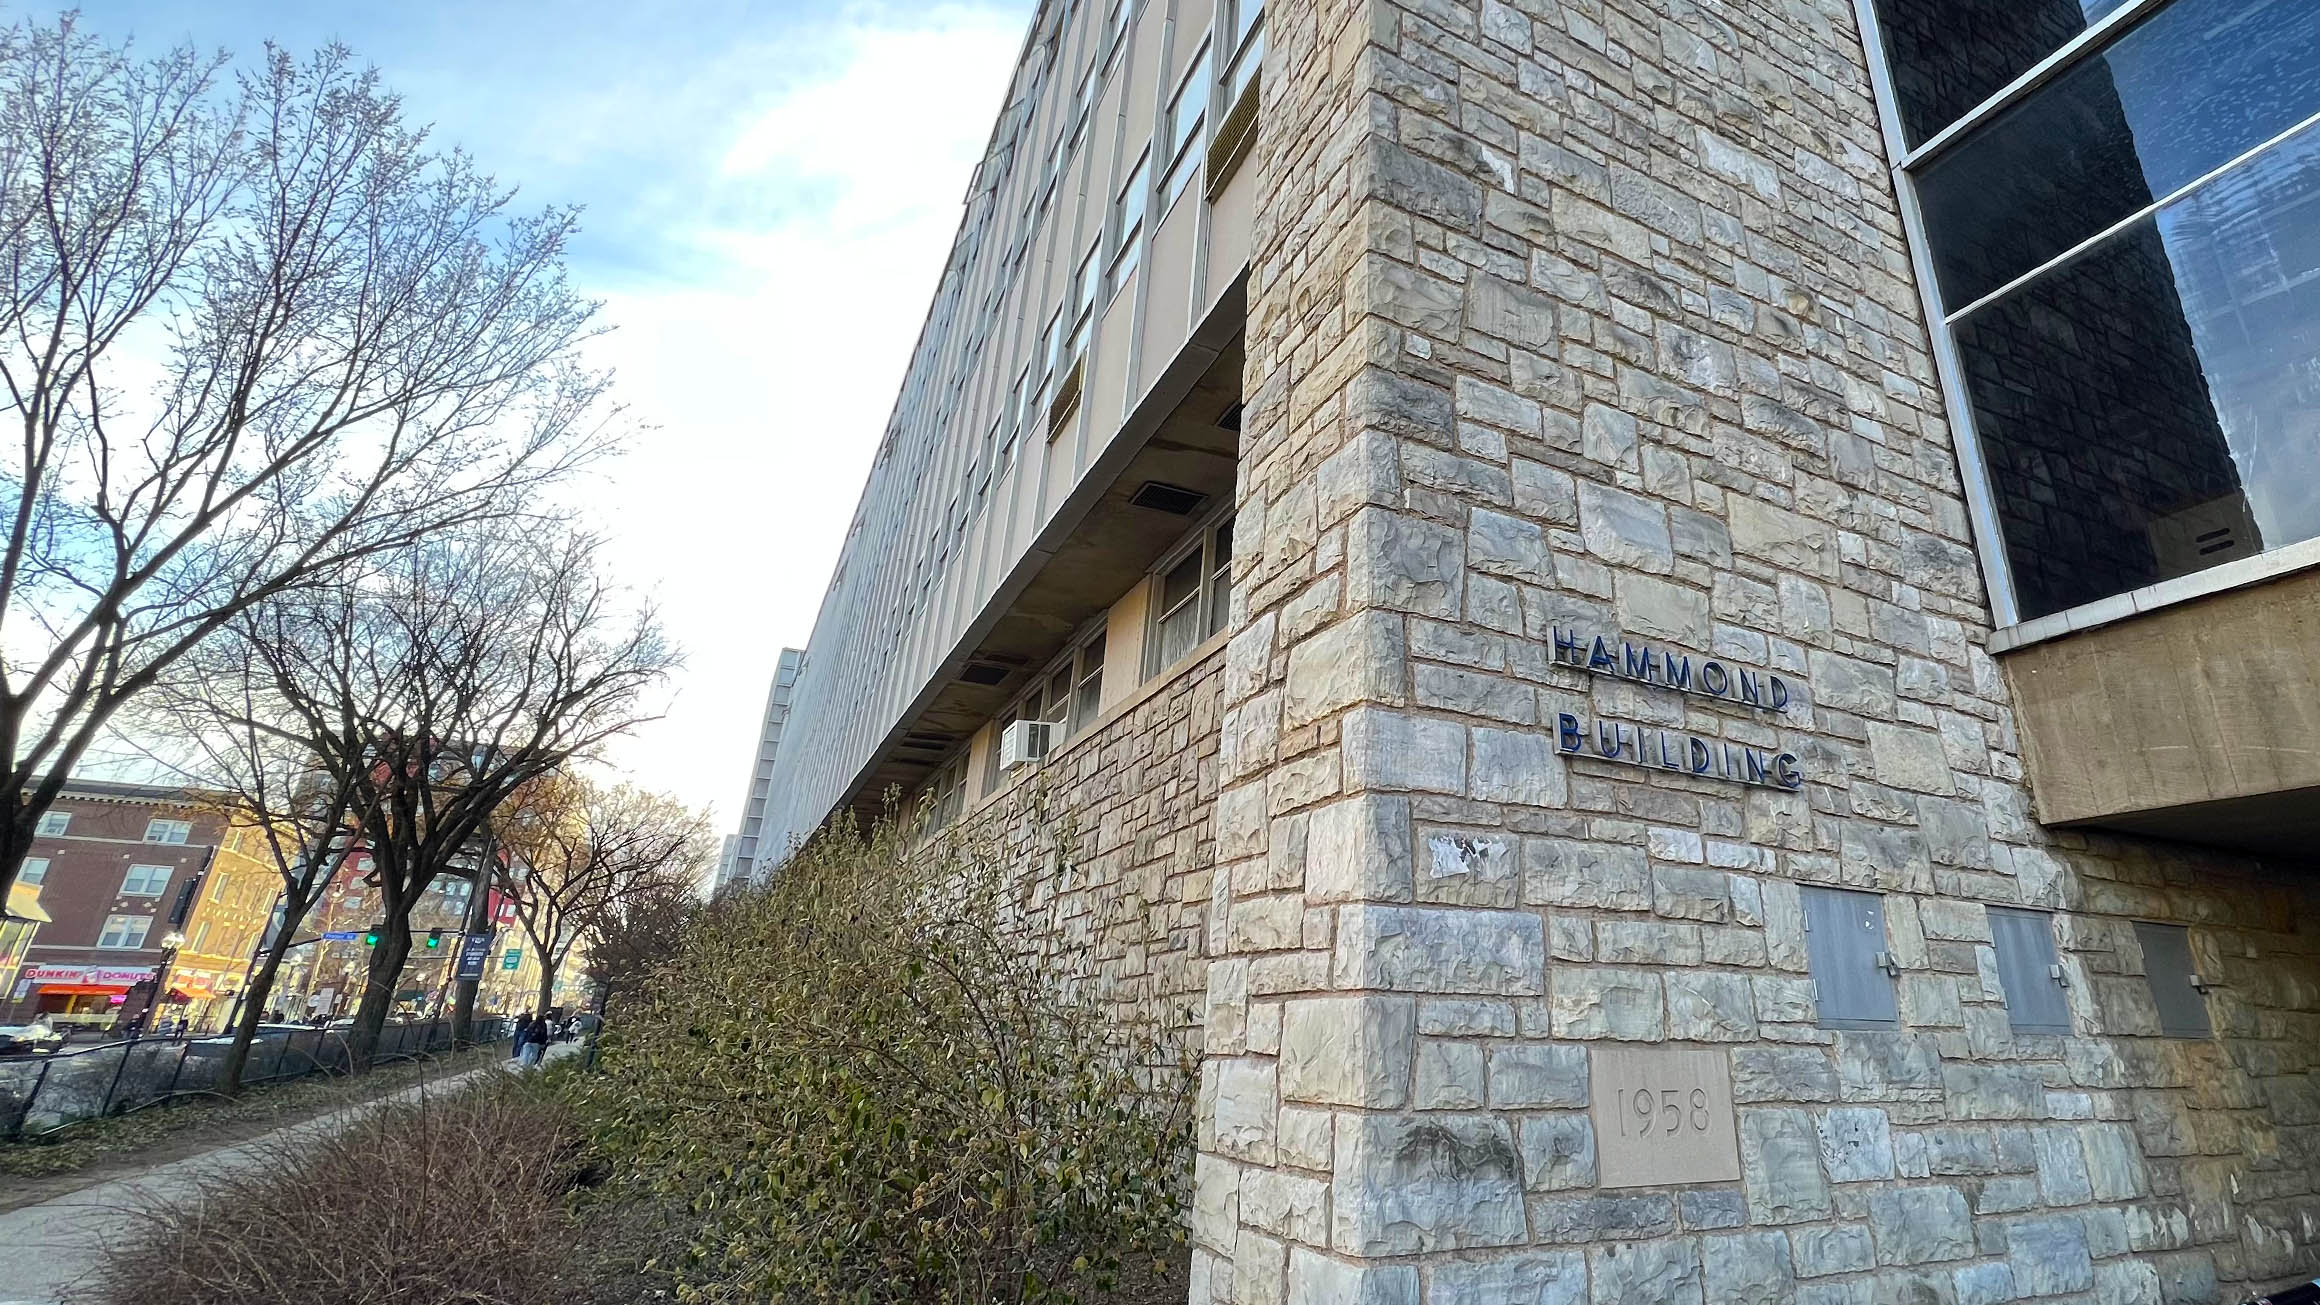 The sign for the Hammond Building at Penn State is shown on a stone wall